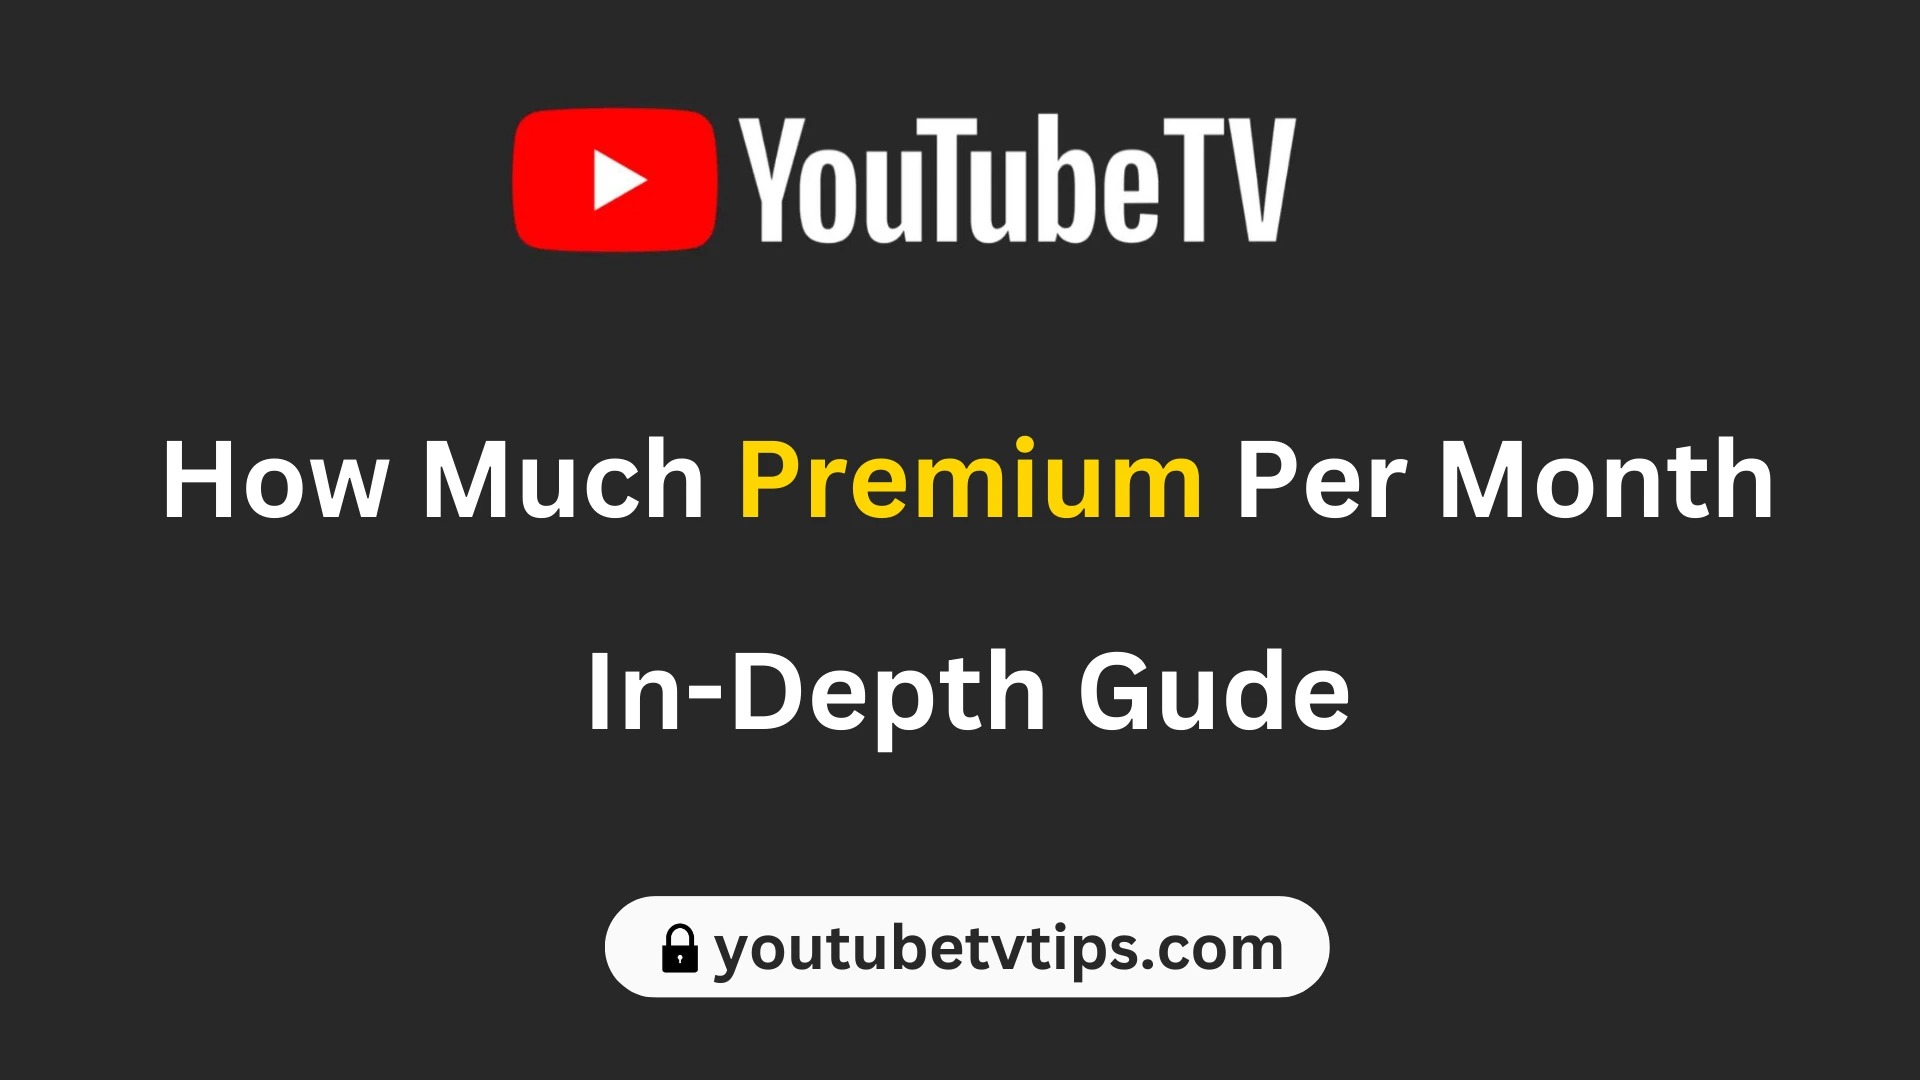 How Much Is YouTube TV Premium Per Month